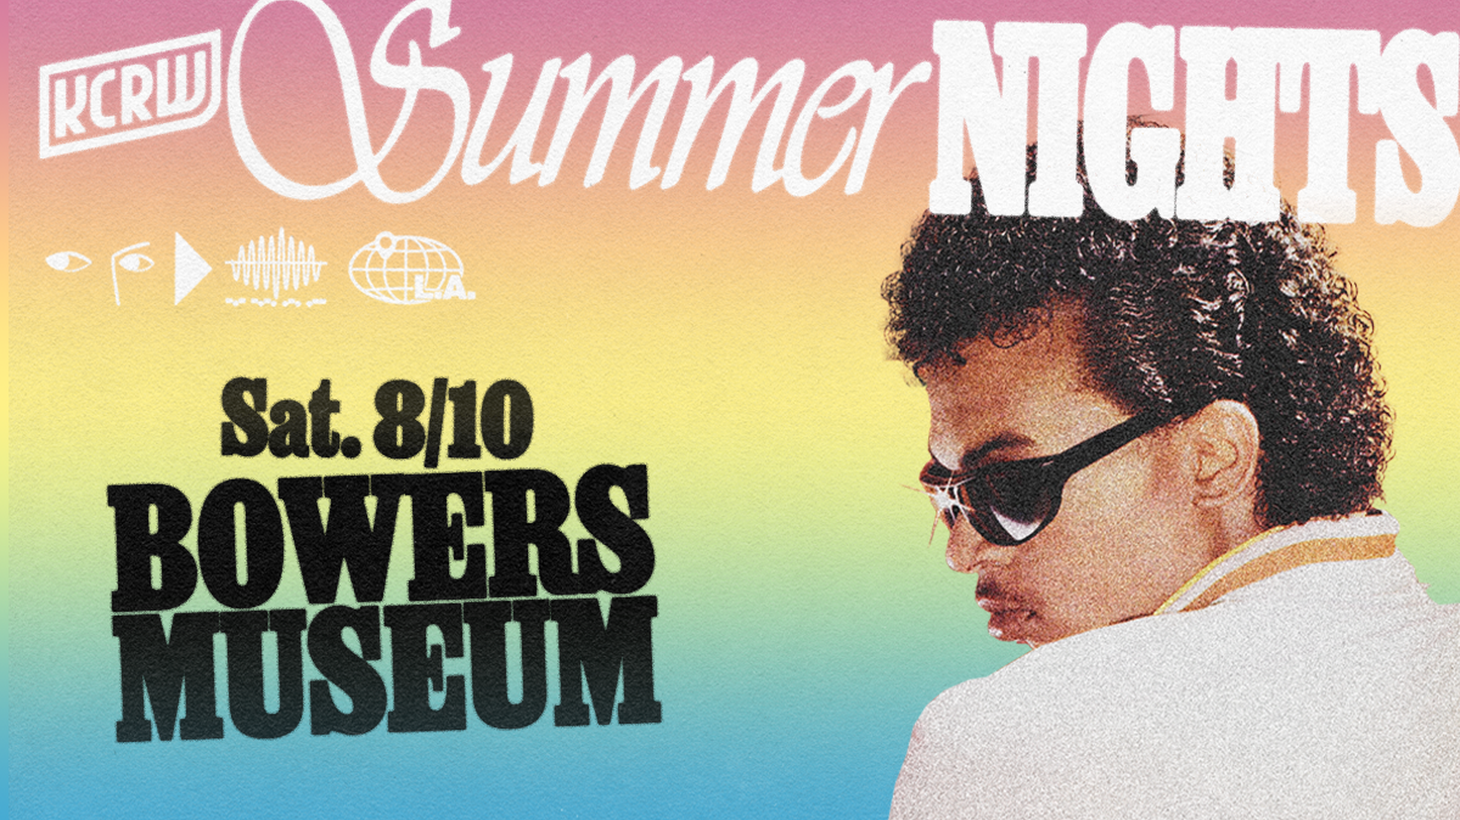 KCRW Summer Nights with Bowers Museum